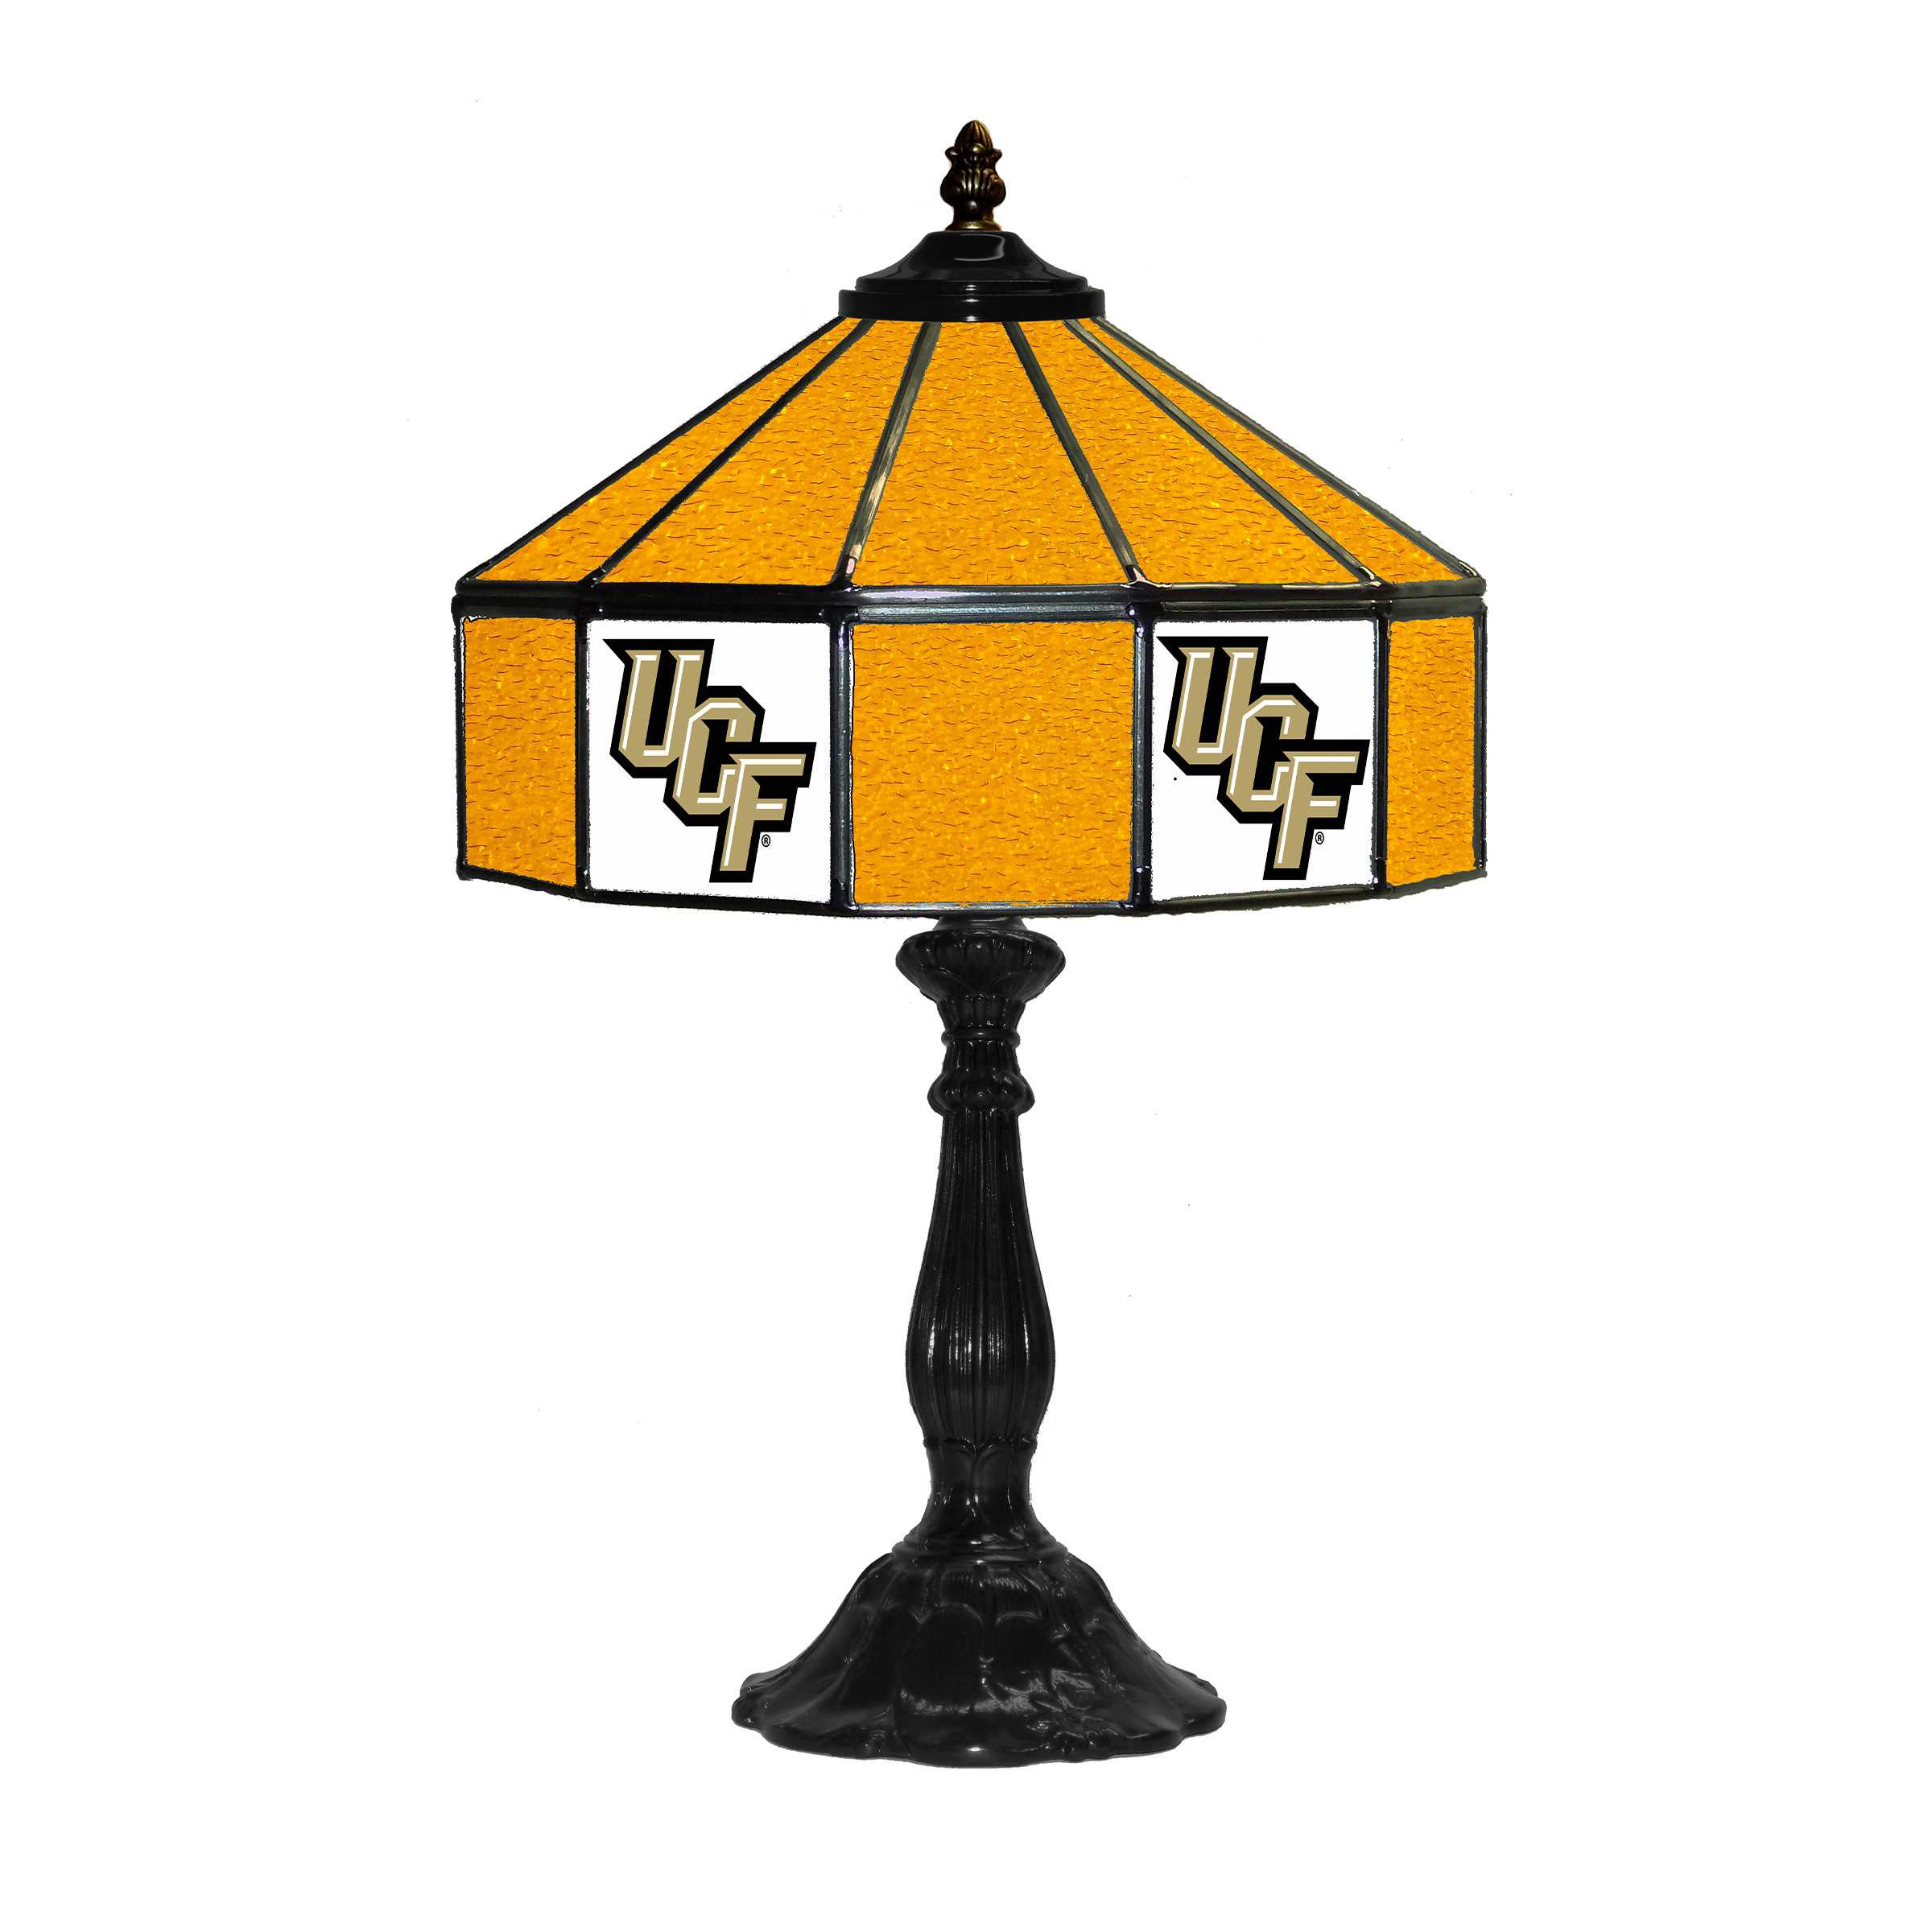 CENTRAL FLORIDA UNIVERSITY 21" GLASS TABLE LAMP